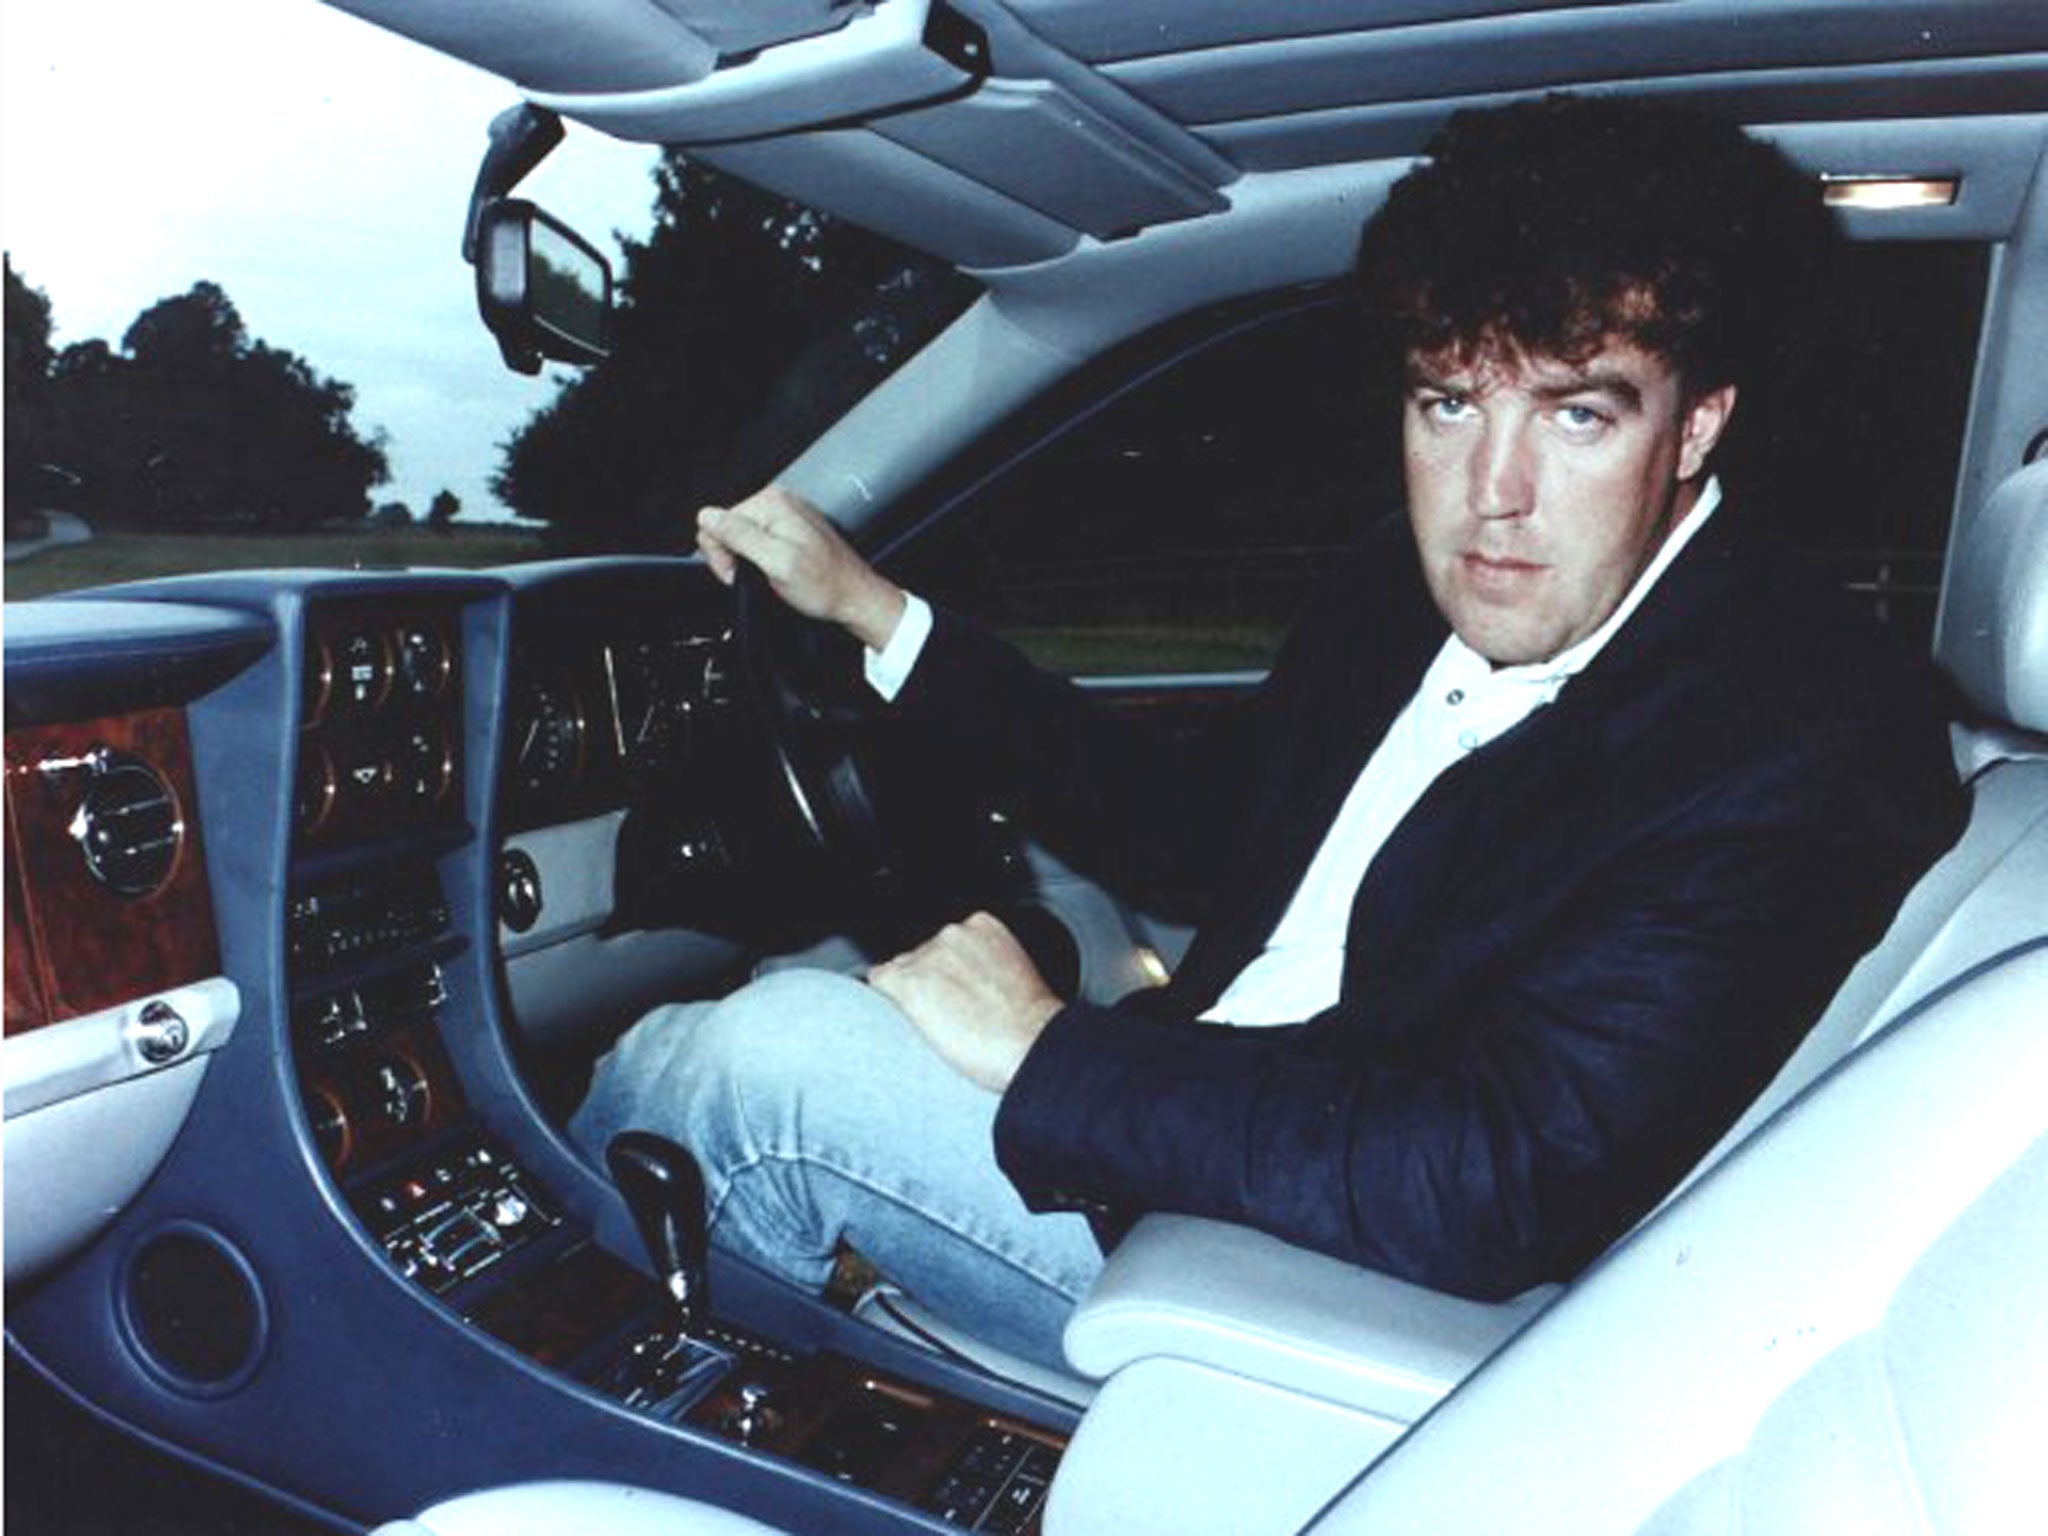 Jeremy Clarkson, pictured here in 1995